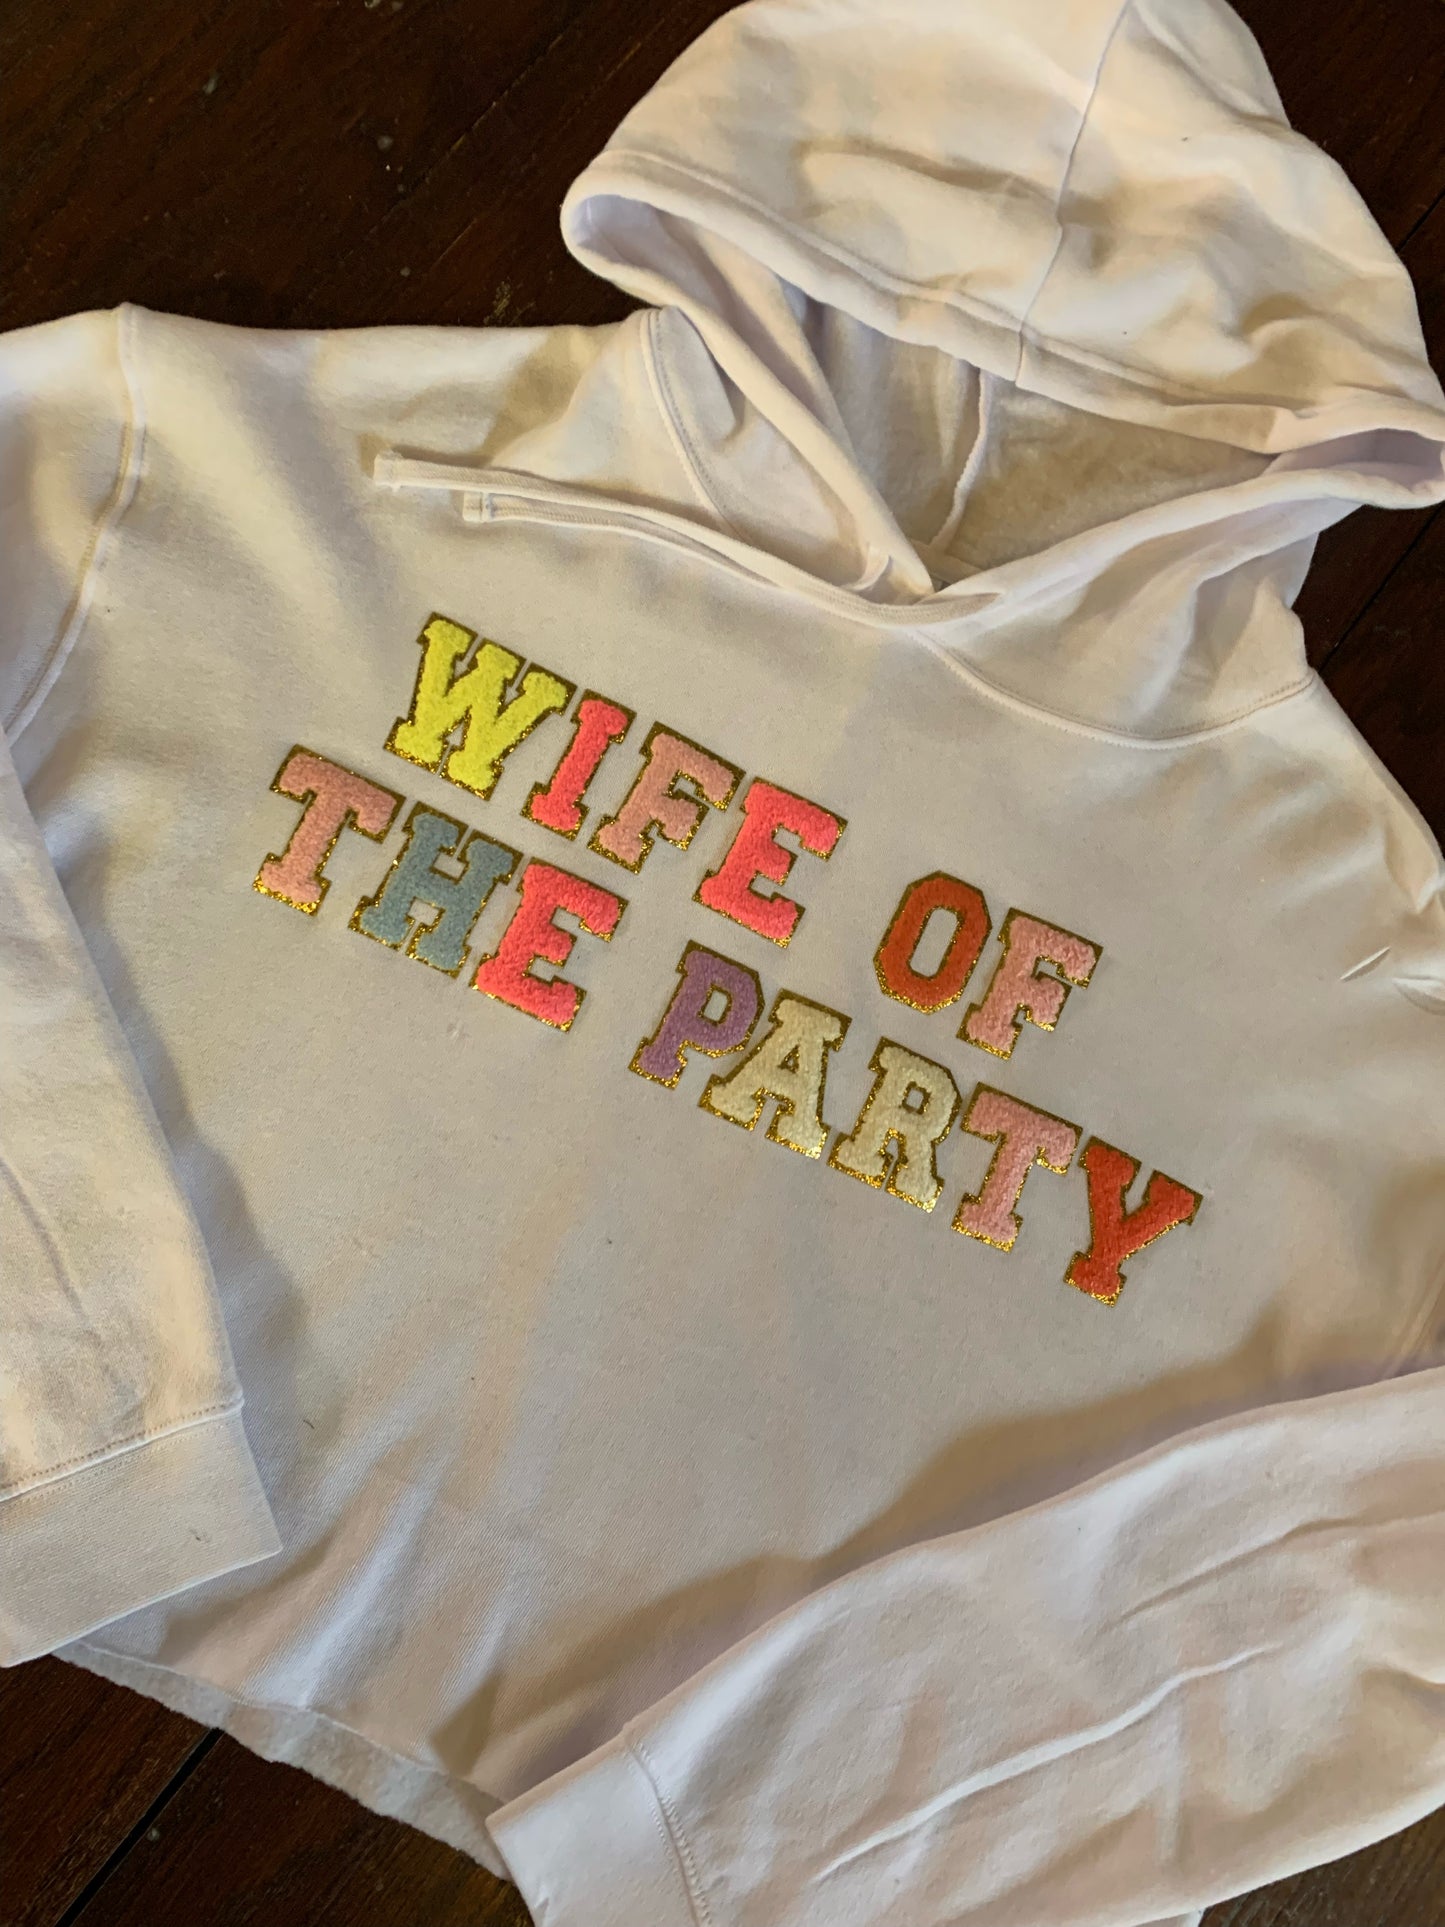 Wife Of The Party